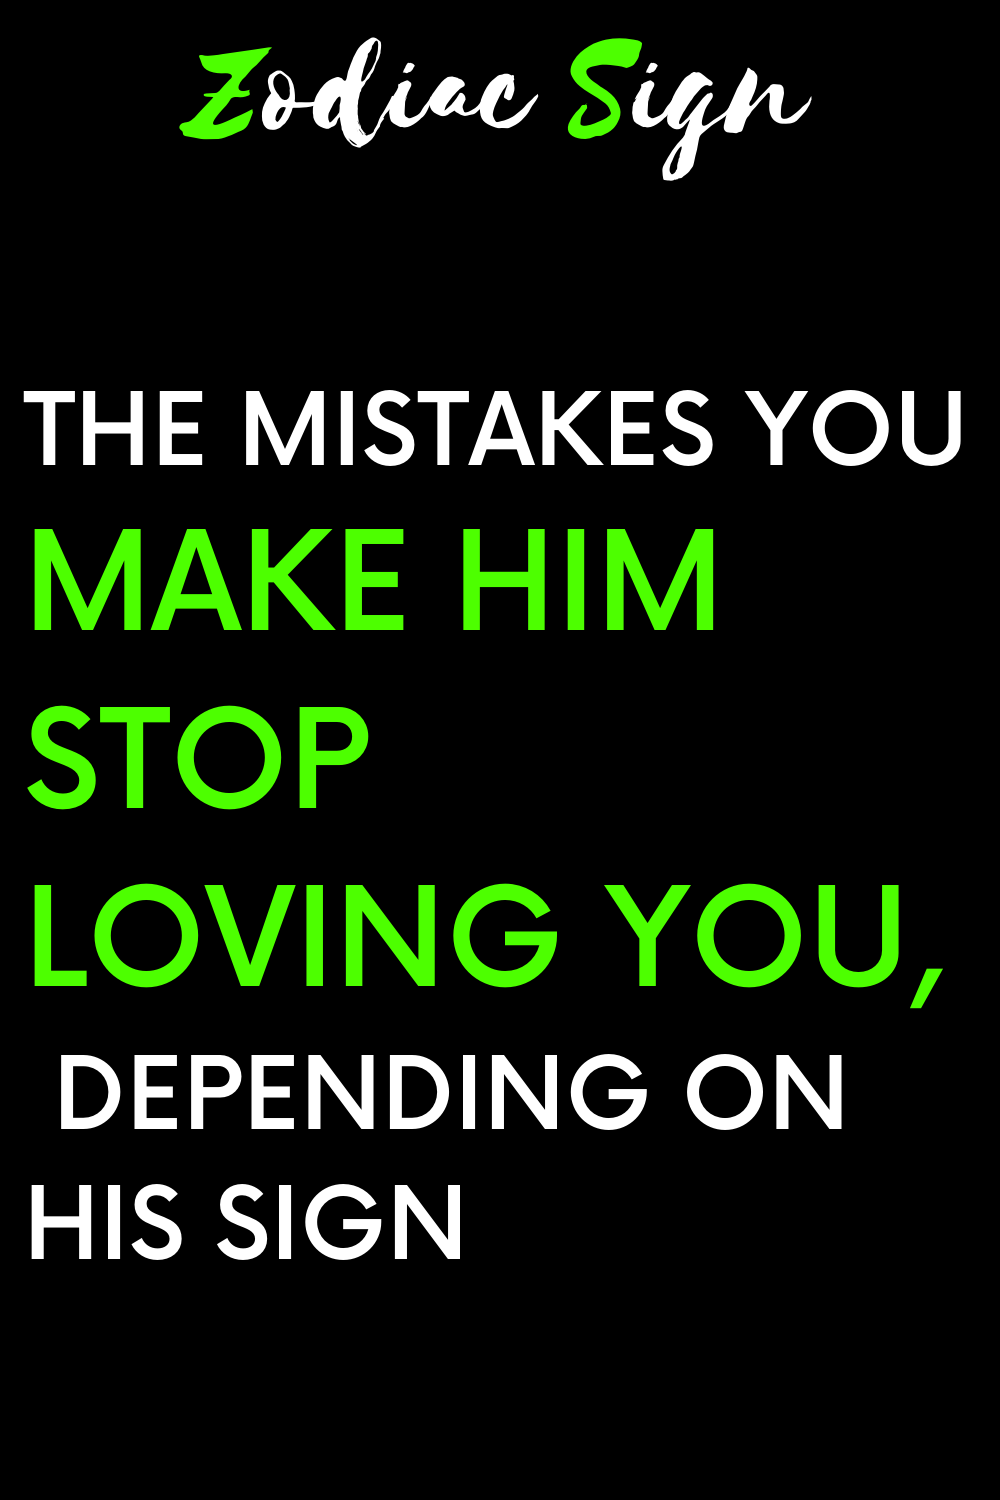 The mistakes you make him stop loving you, depending on his sign